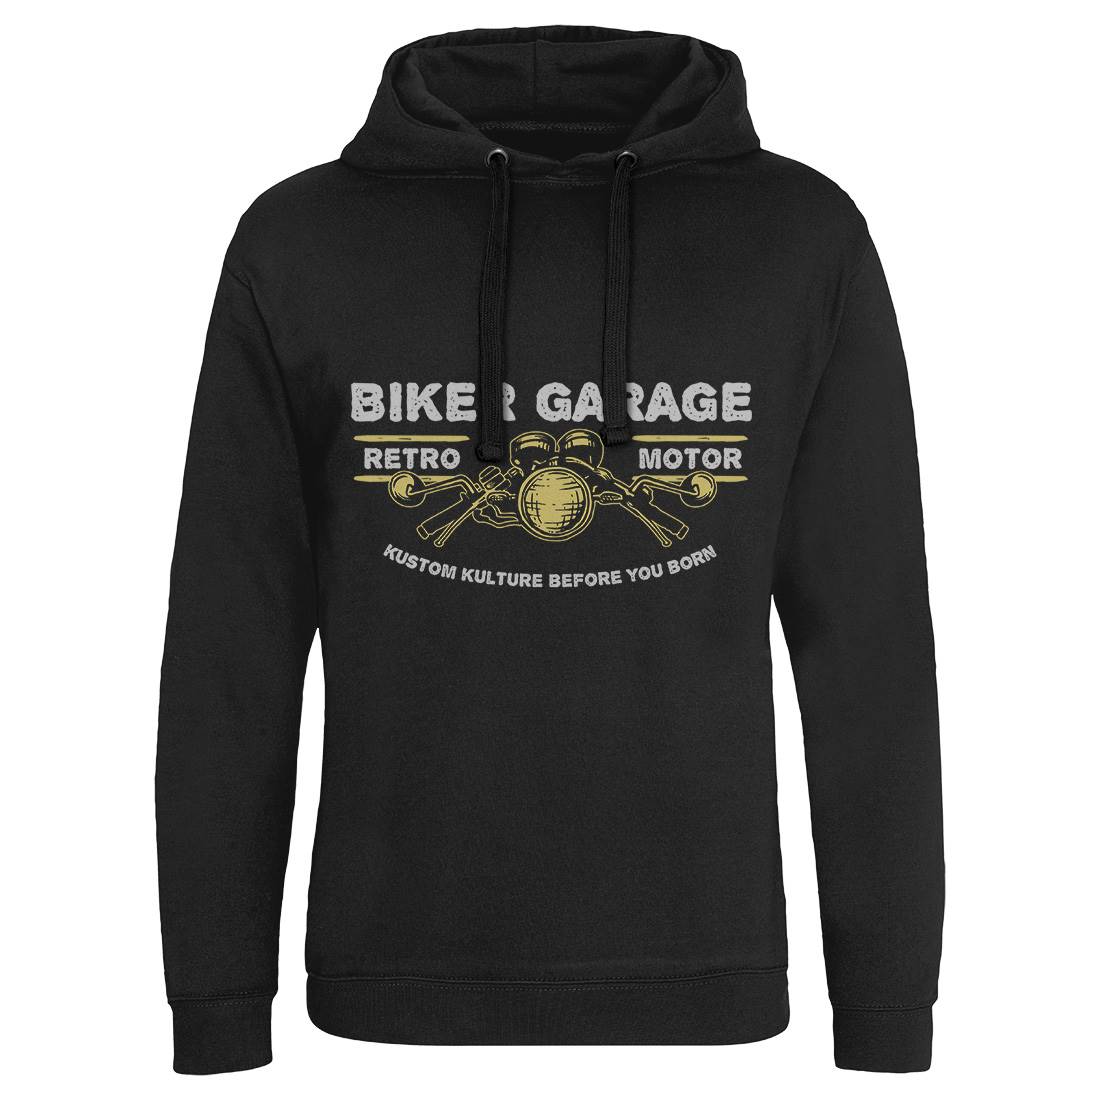 Biker Garage Mens Hoodie Without Pocket Motorcycles A303